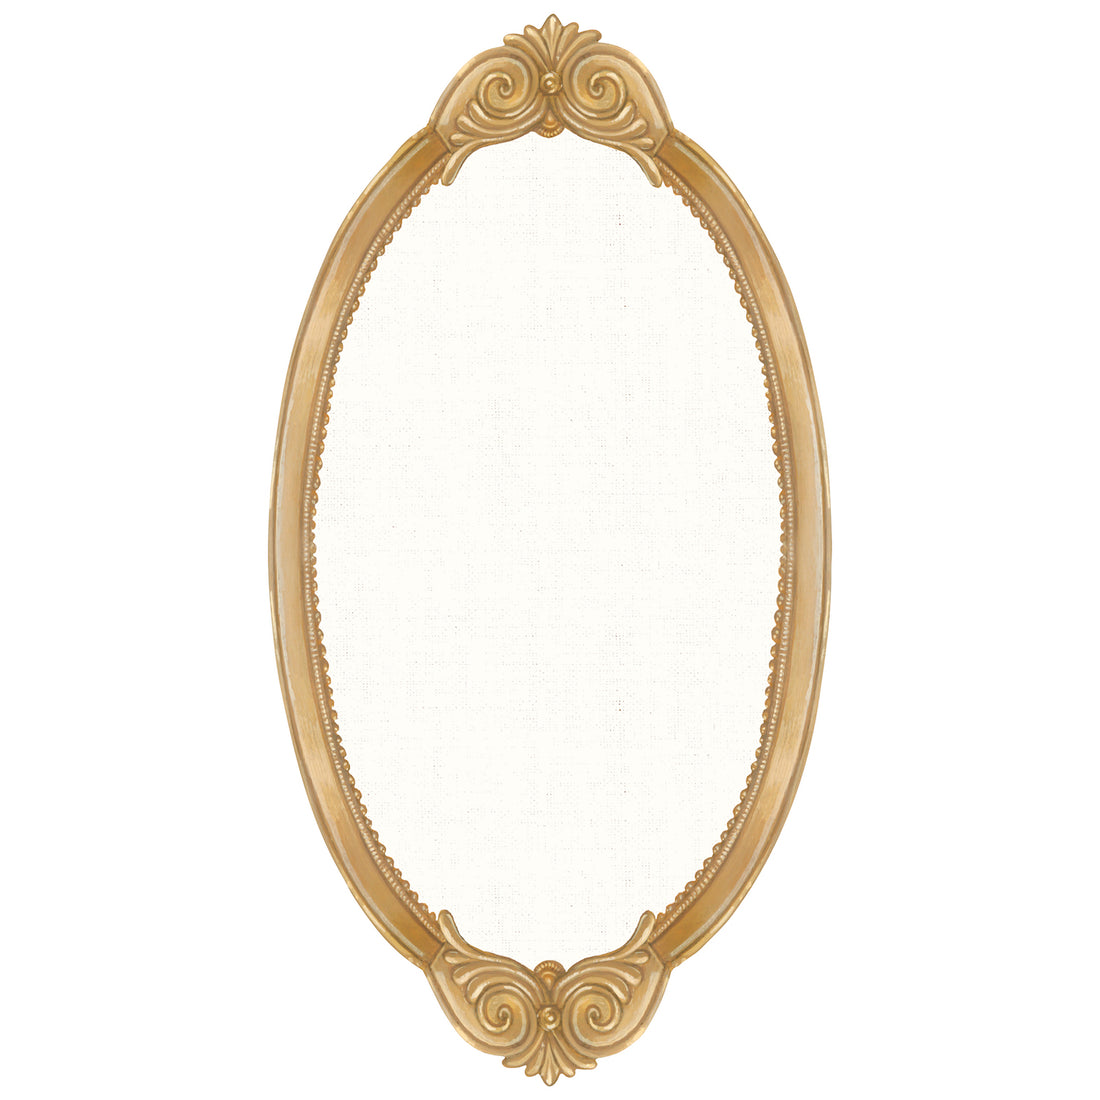 A die-cut ornate gold vintage-style frame surrounding blank white space for personalization.